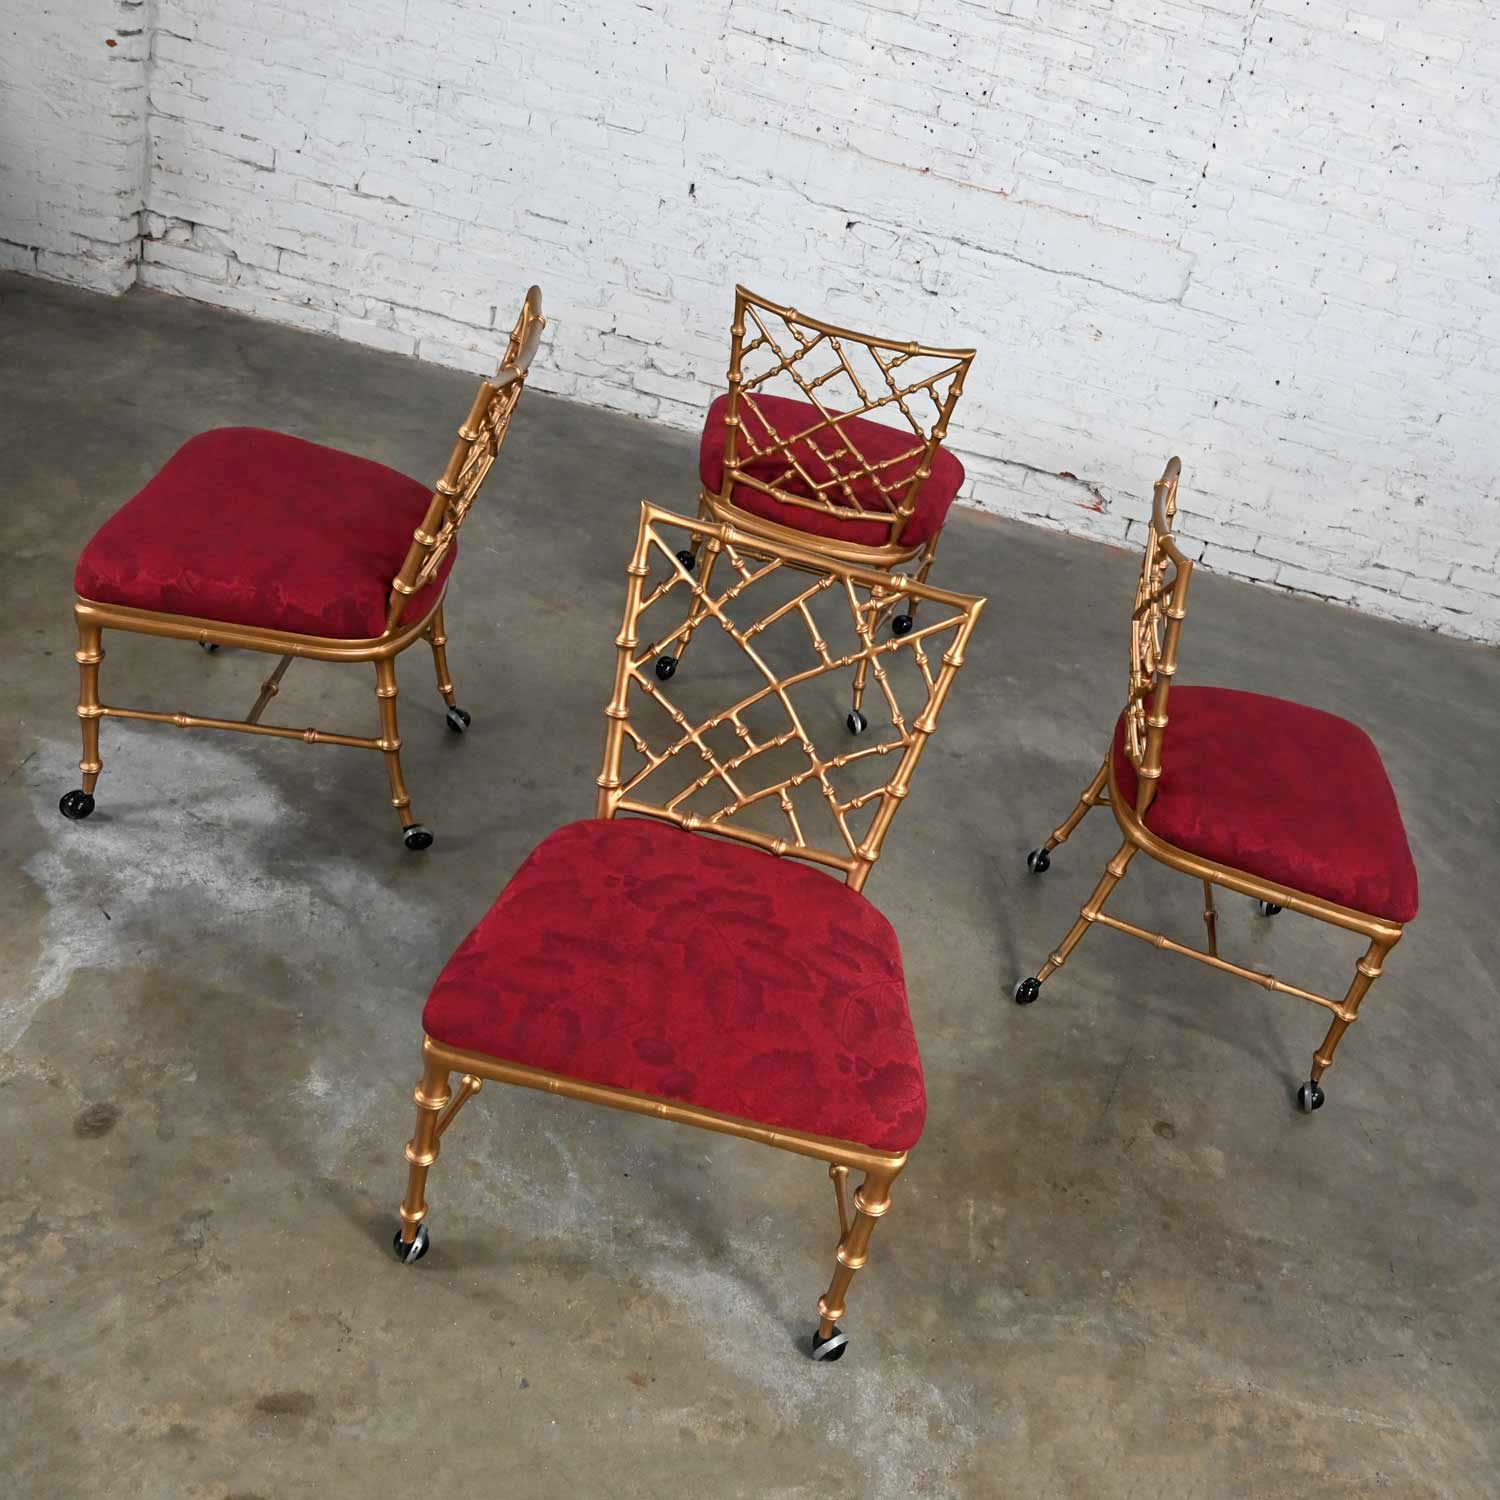 Vintage Chinoiserie Faux Bamboo Gold Painted Metal Rolling Chairs Style of Phyllis Morris Set of 4